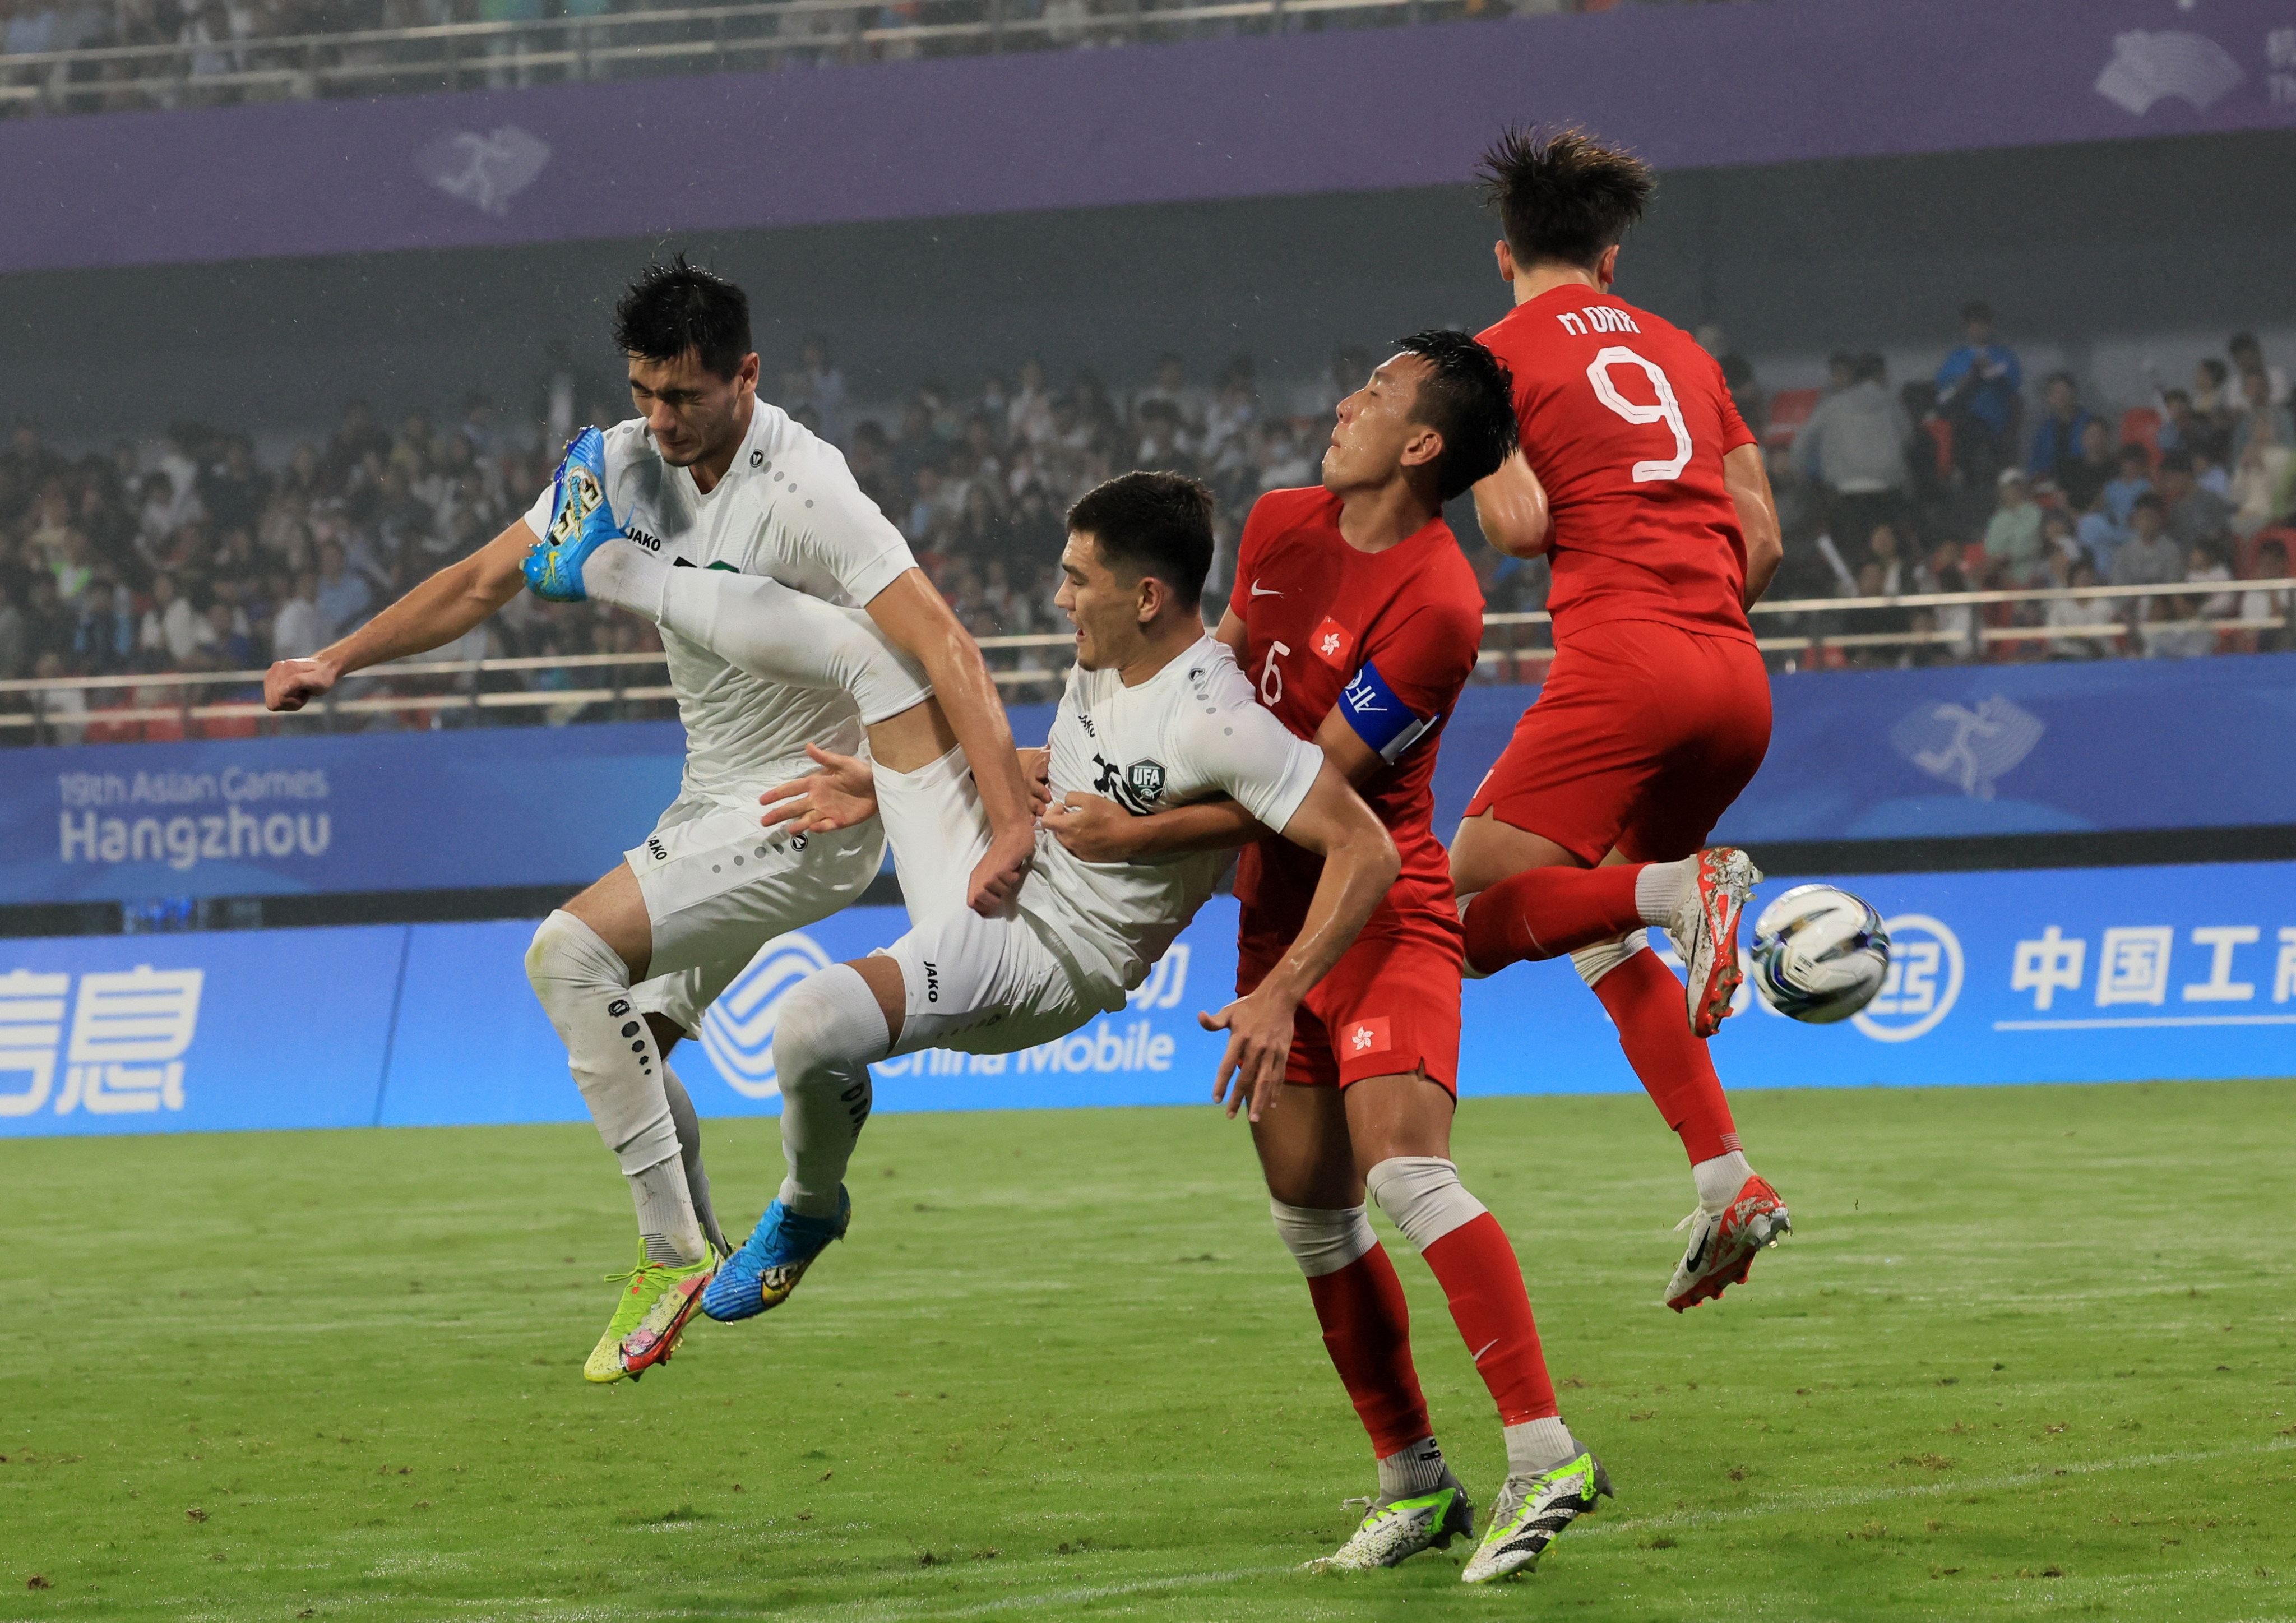 Hong Kong’s opening men’s football match ended in a 1-0 loss to Uzbekistan on Friday. Photo: Dickson Lee